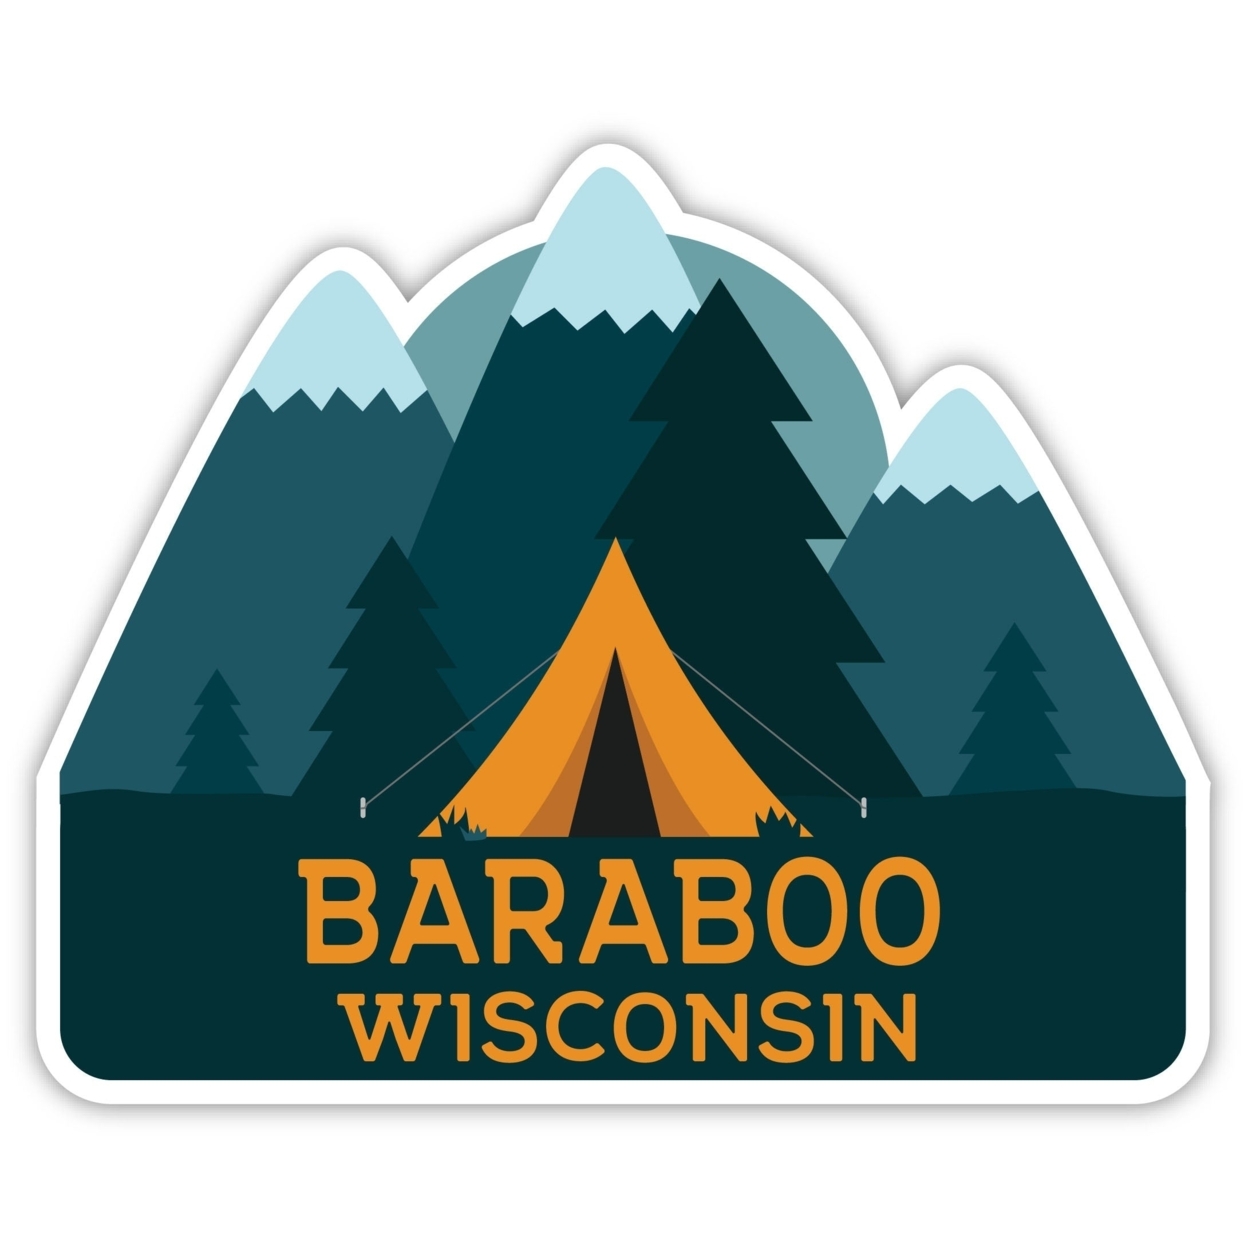 Baraboo Wisconsin Souvenir Decorative Stickers (Choose Theme And Size) - Single Unit, 8-Inch, Tent